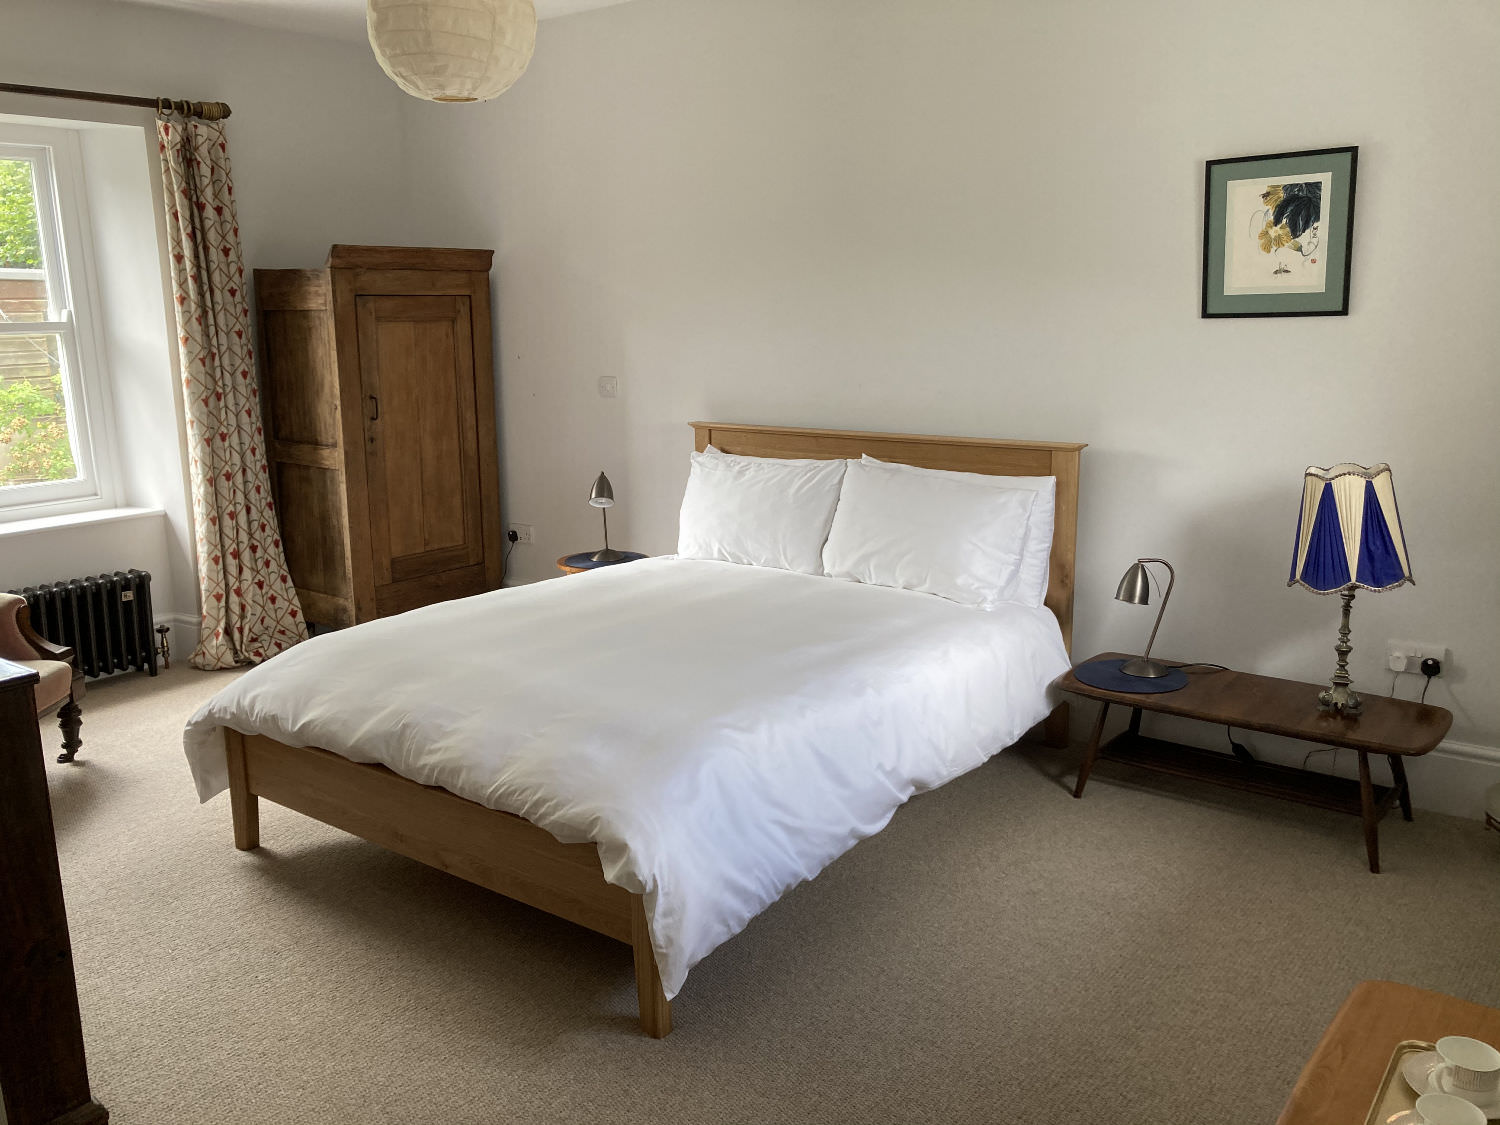 Image showing large double bedroom, white bed covers and other furniture.